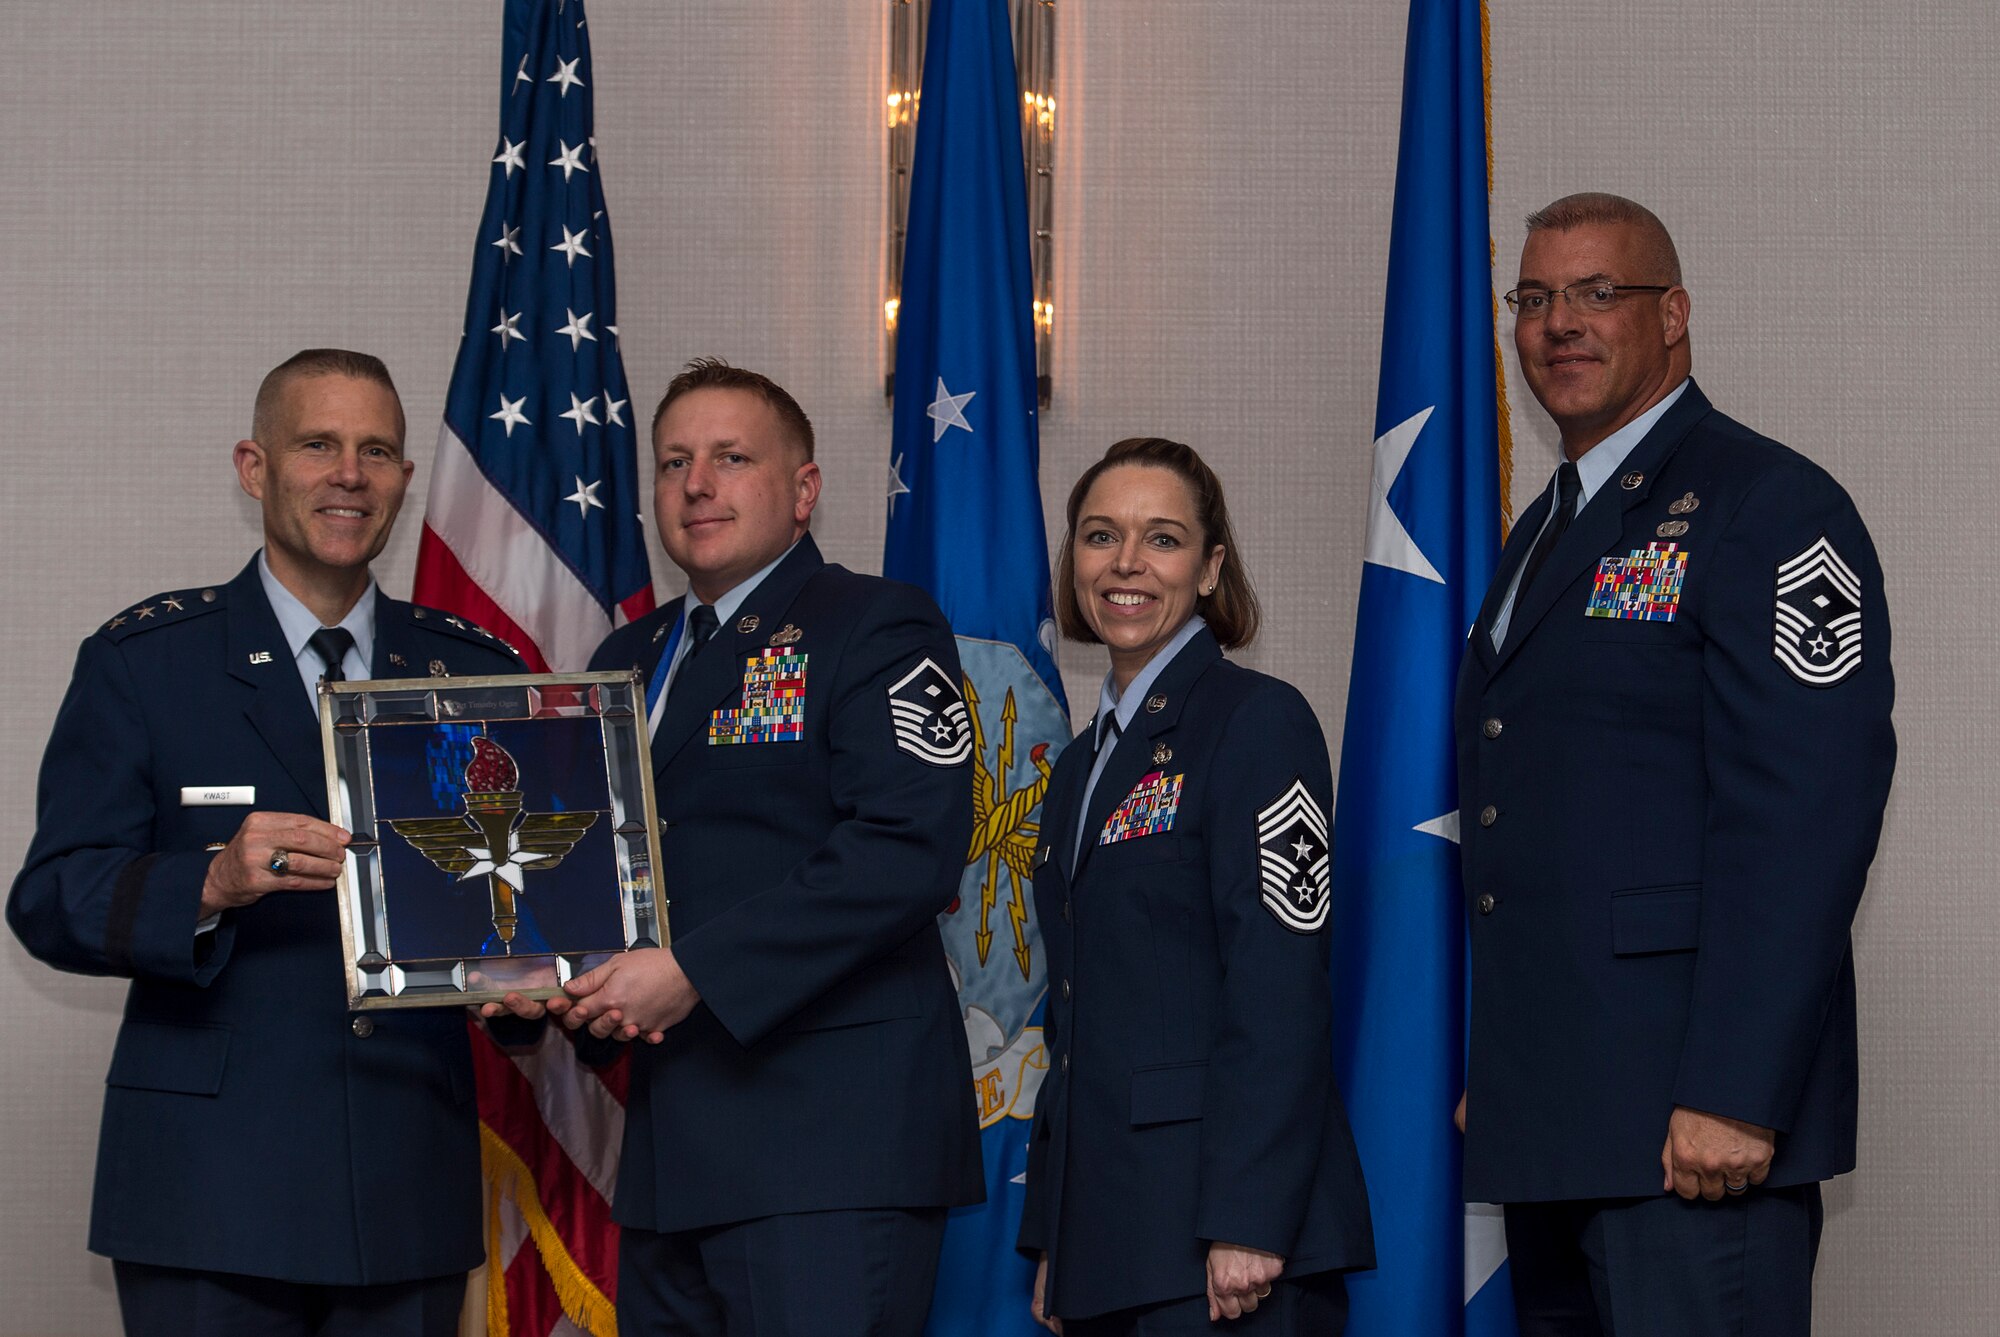 U.S. Air Force Master Sgt. Timothy S. Ogan, First Sergeant assigned to the Air Force Institute of Technology at Wright-Patterson Air Force Base, Ohio, receives the Air Education and Training Command First Sergeant of the Year Award from Lt. Gen. Steve Kwast, Commander of AETC during the AETC 12 Outstanding Airmen of the Year Awards banquet Feb. 22, 2018 in Orlando, Fla. Ogan won Air University First Sergeant of the Year, led18 fellow First Sergeants and 22 committees as President of the First Sergeant Council, as well as completed six credits towards his Master’s Degree. (U.S. Air Force photo by Staff Sgt. Kenneth W. Norman)